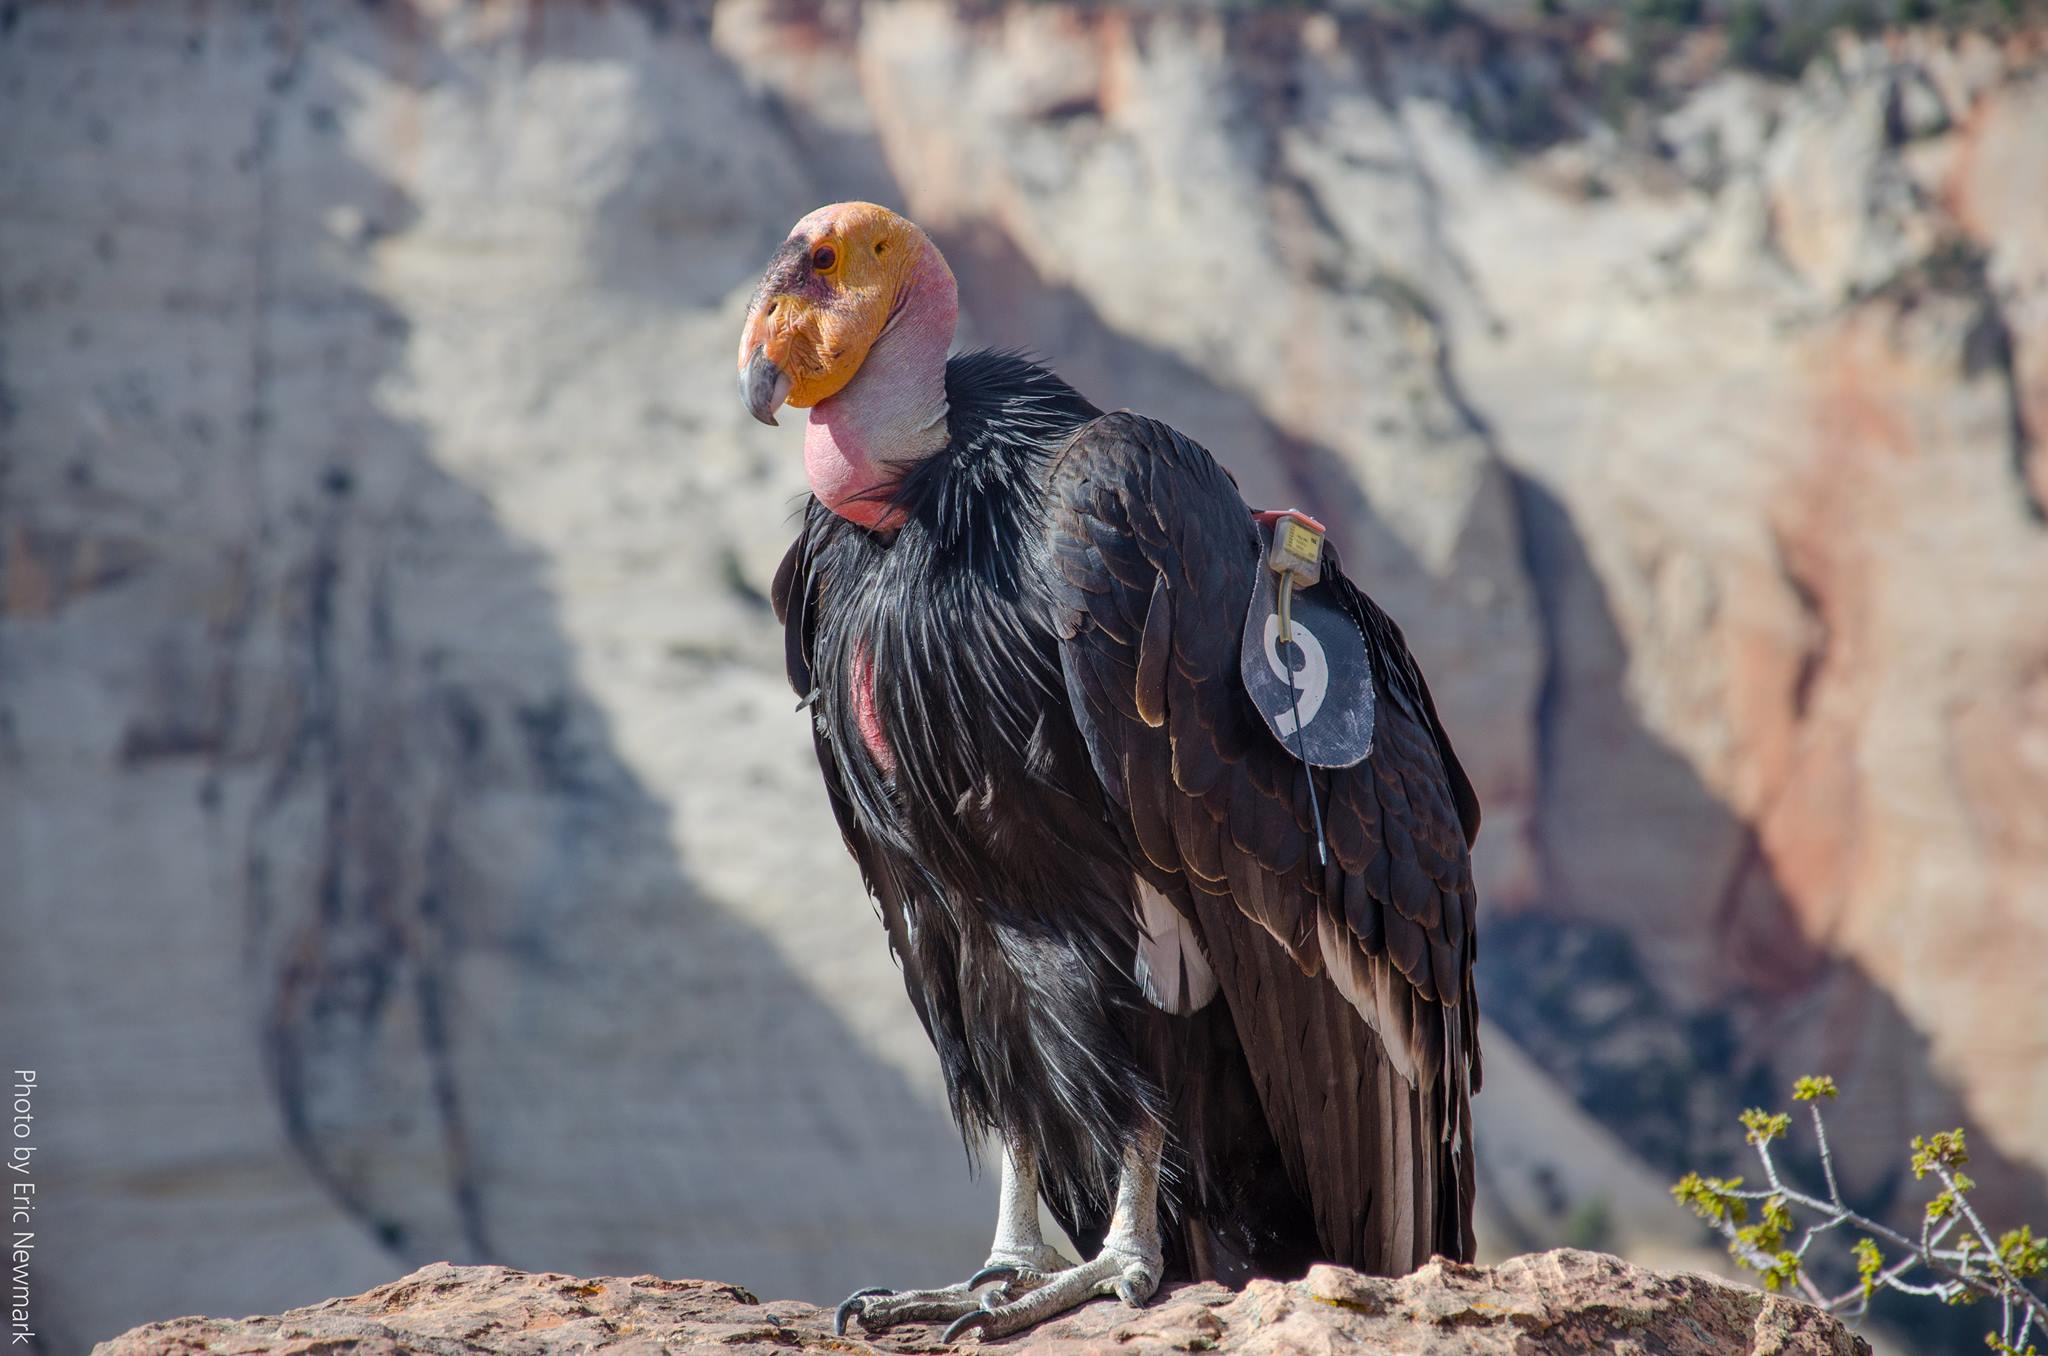 The female condor from the Zion National Park pair is pictured perched atop a rock. Photo courtesy of the National Park Service